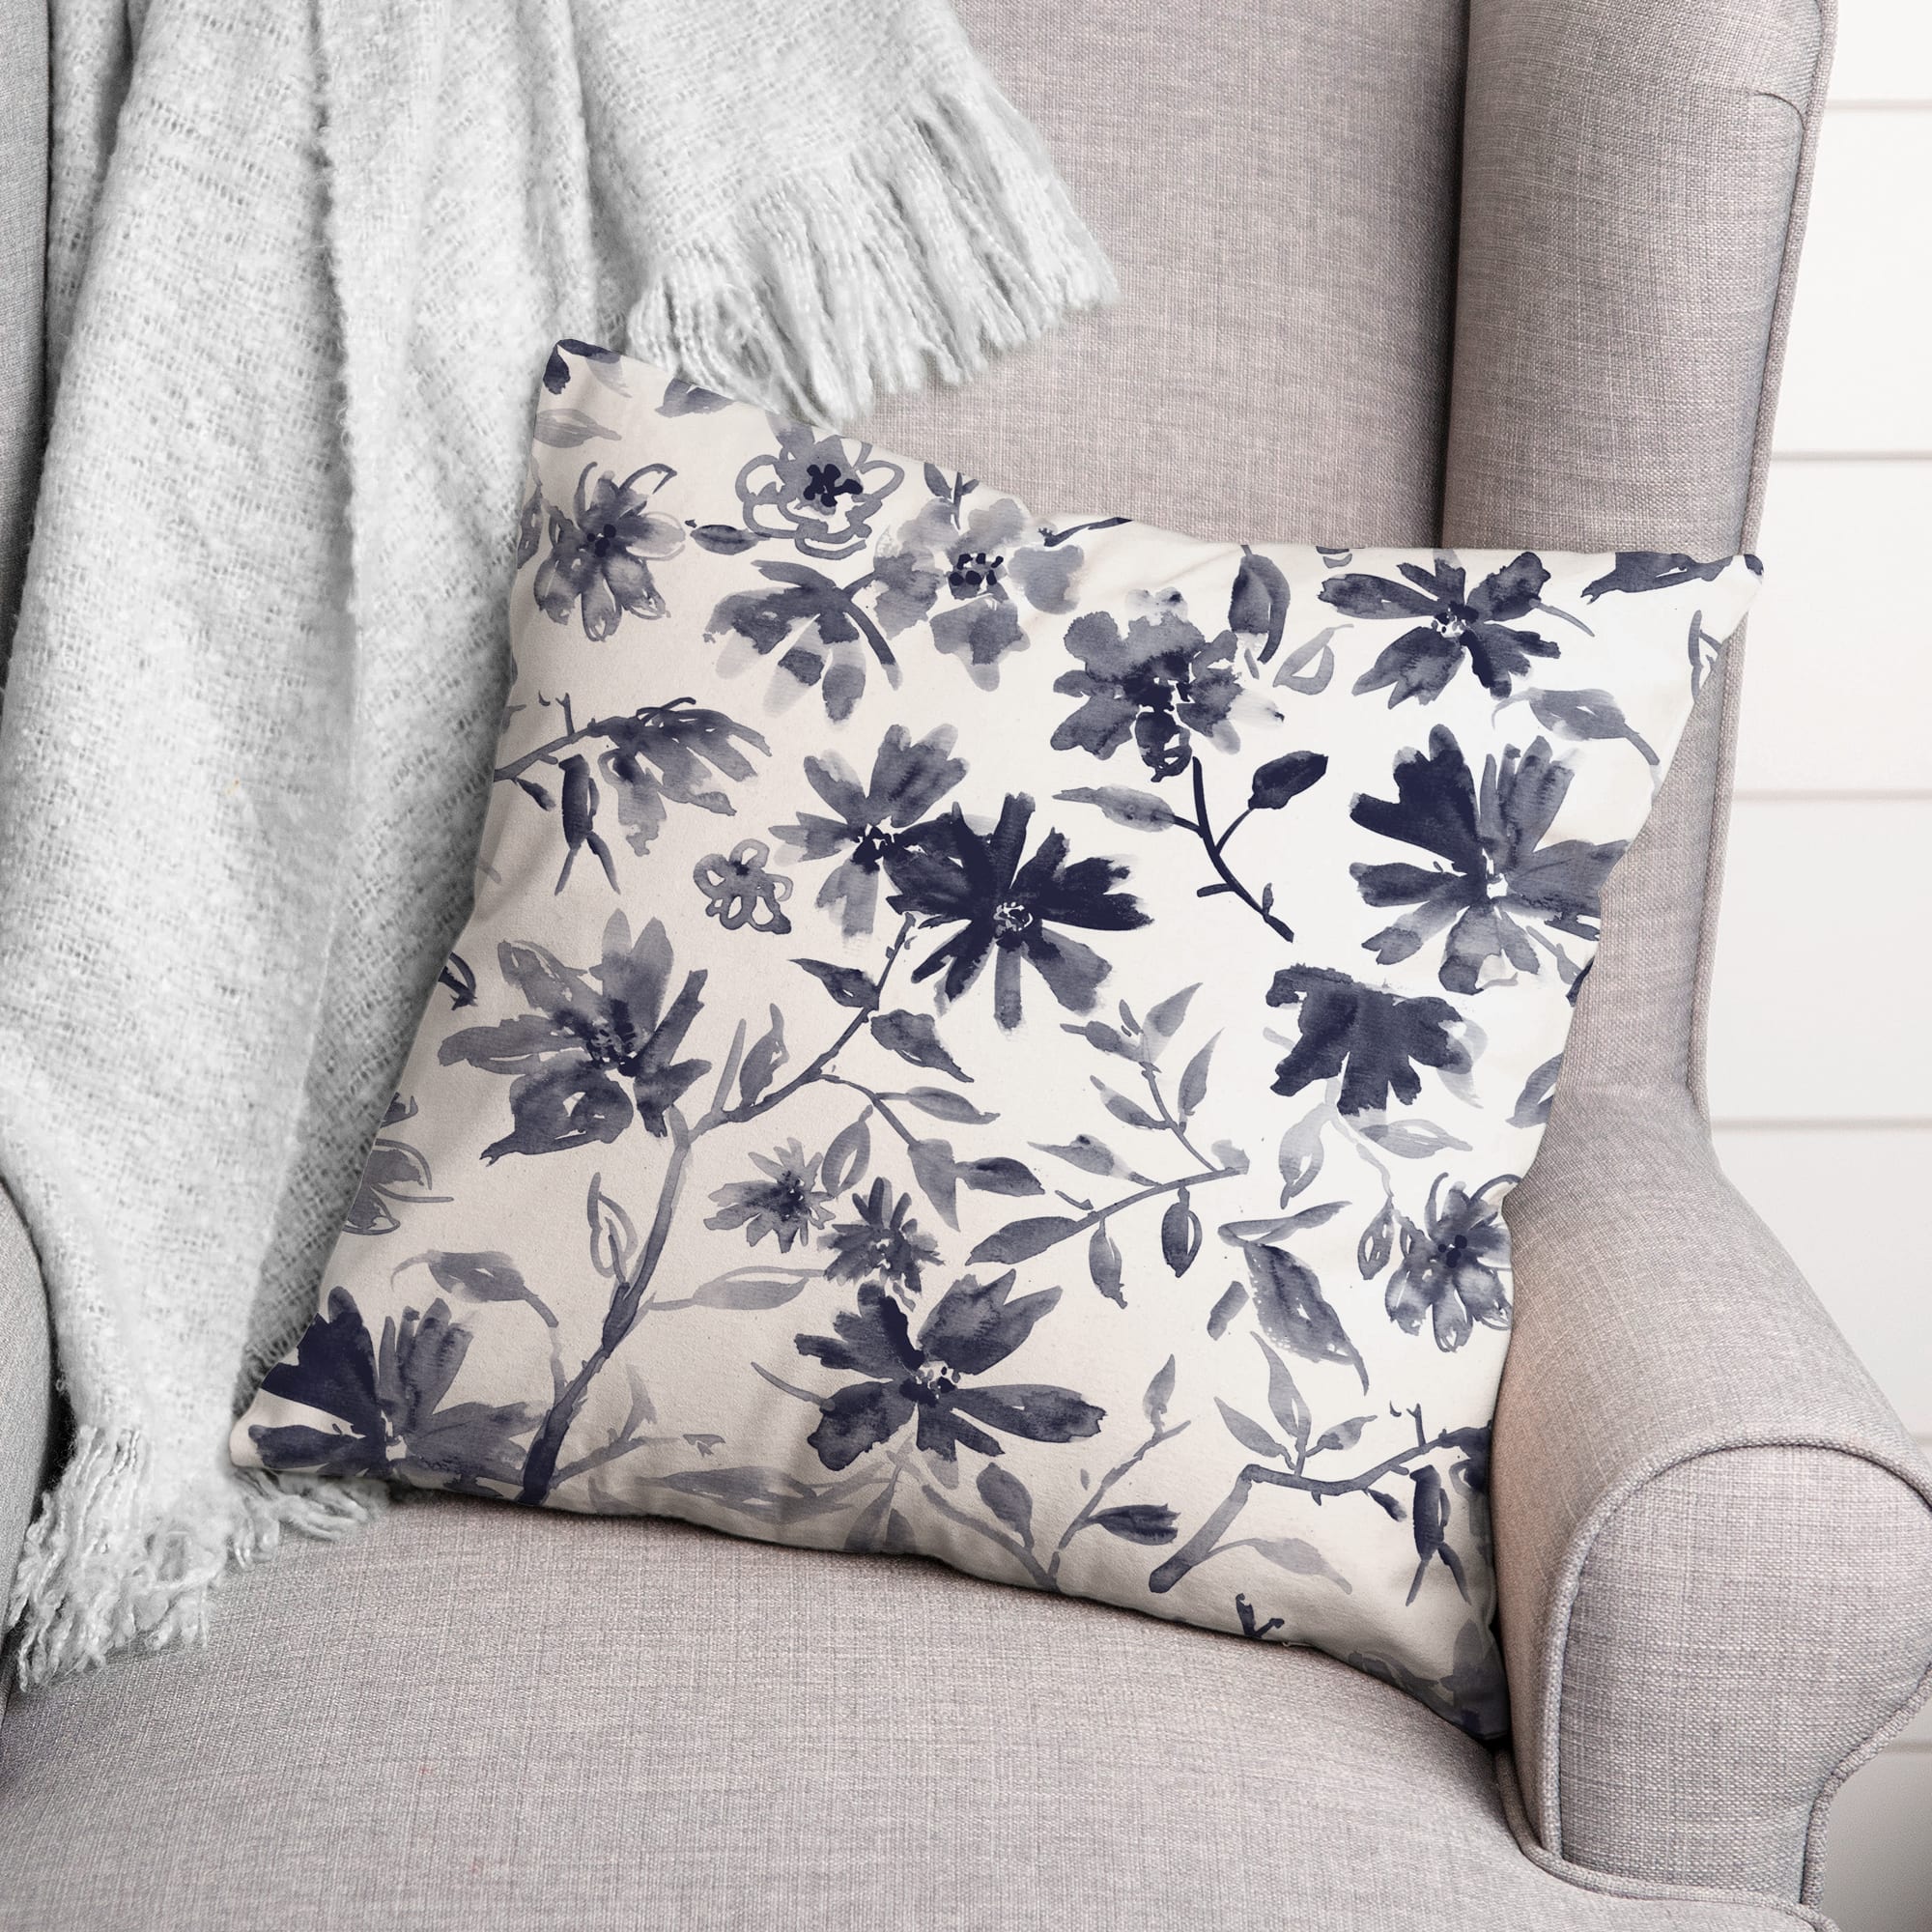 Delicate Floral Print Throw Pillow